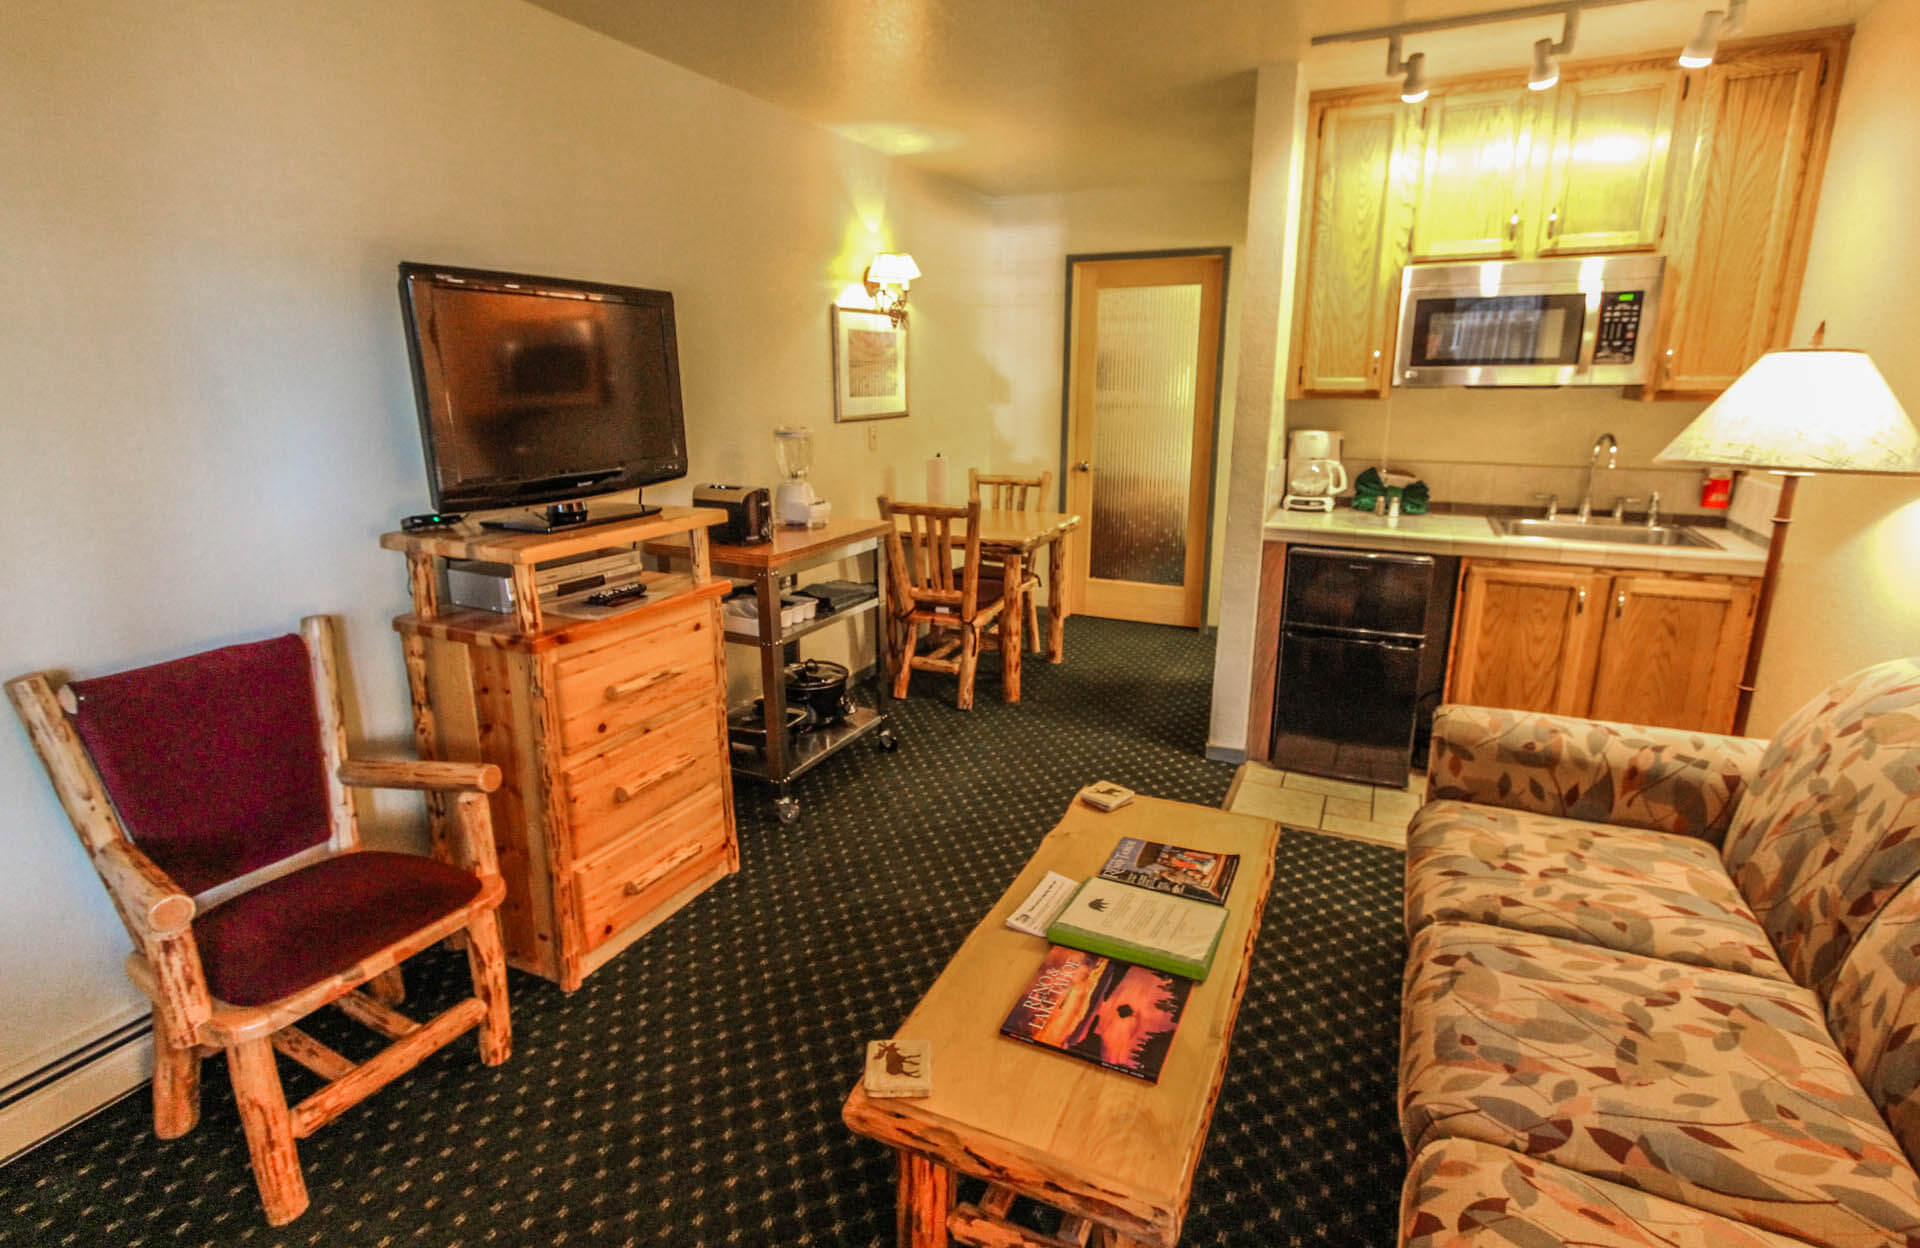 A studio unit with a kitchenette at VRI's The Lodge at Lake Tahoe in California.